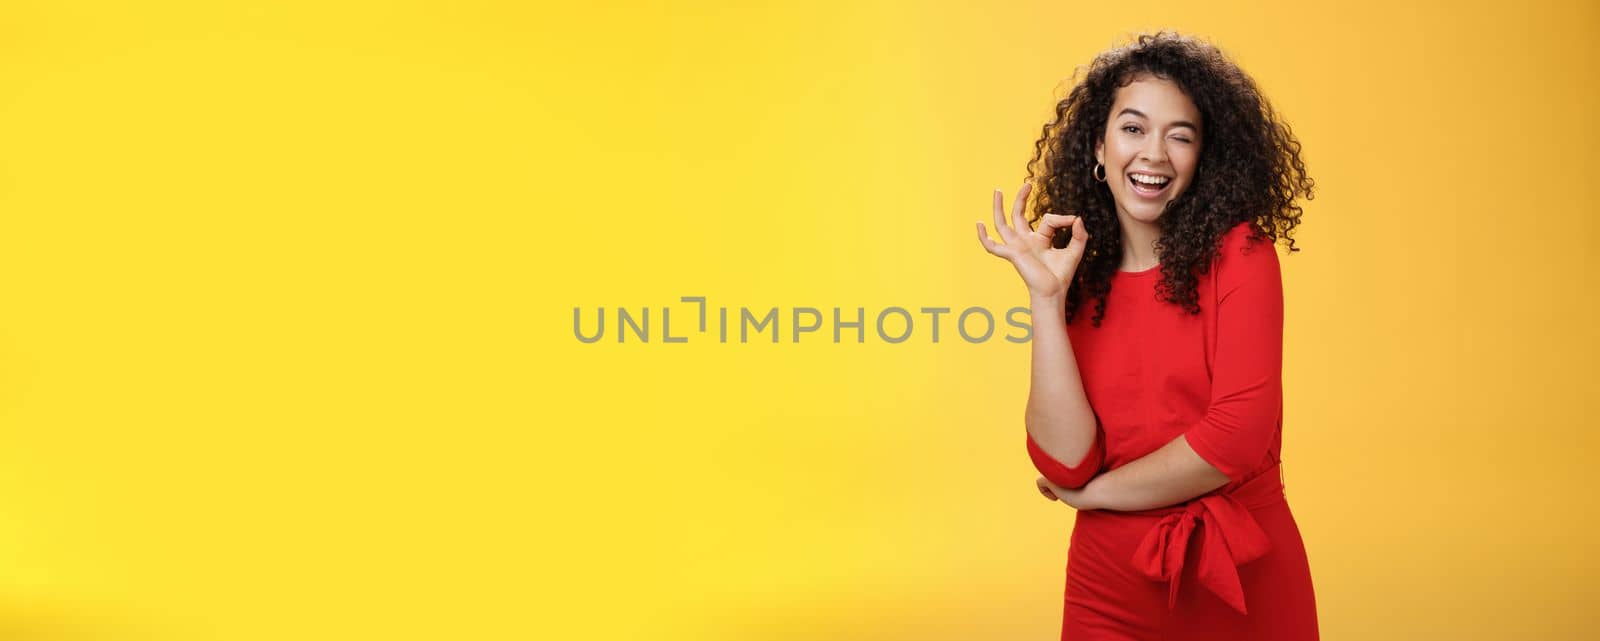 Girl feeling awesome. Friendly-looking excited and upbeat charming girlfriend with curly hair in dress winking playfully and smiling as showing okay gesture having deal and things under control. Body language and facial expressions concept